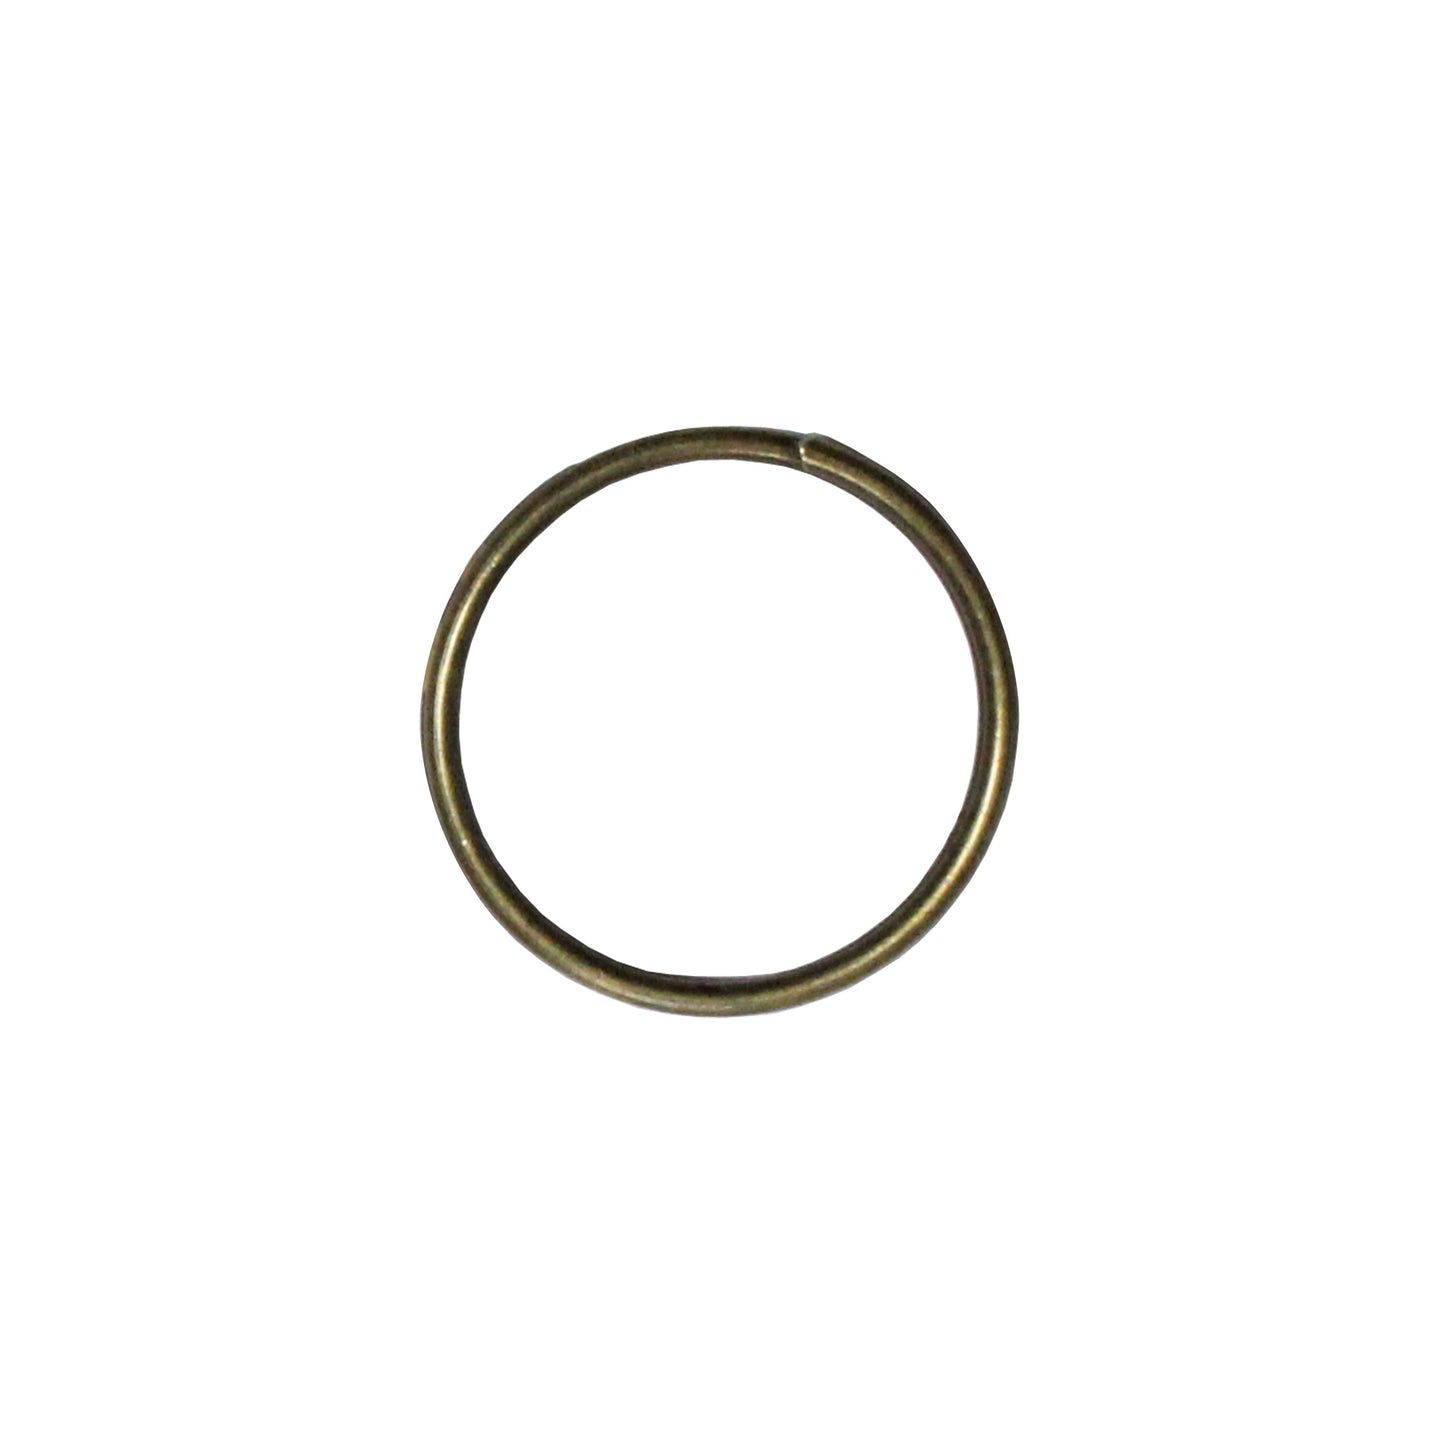 20mm Antique Bronze Split Ring / 10 Pack / for key rings or secure charms or tags